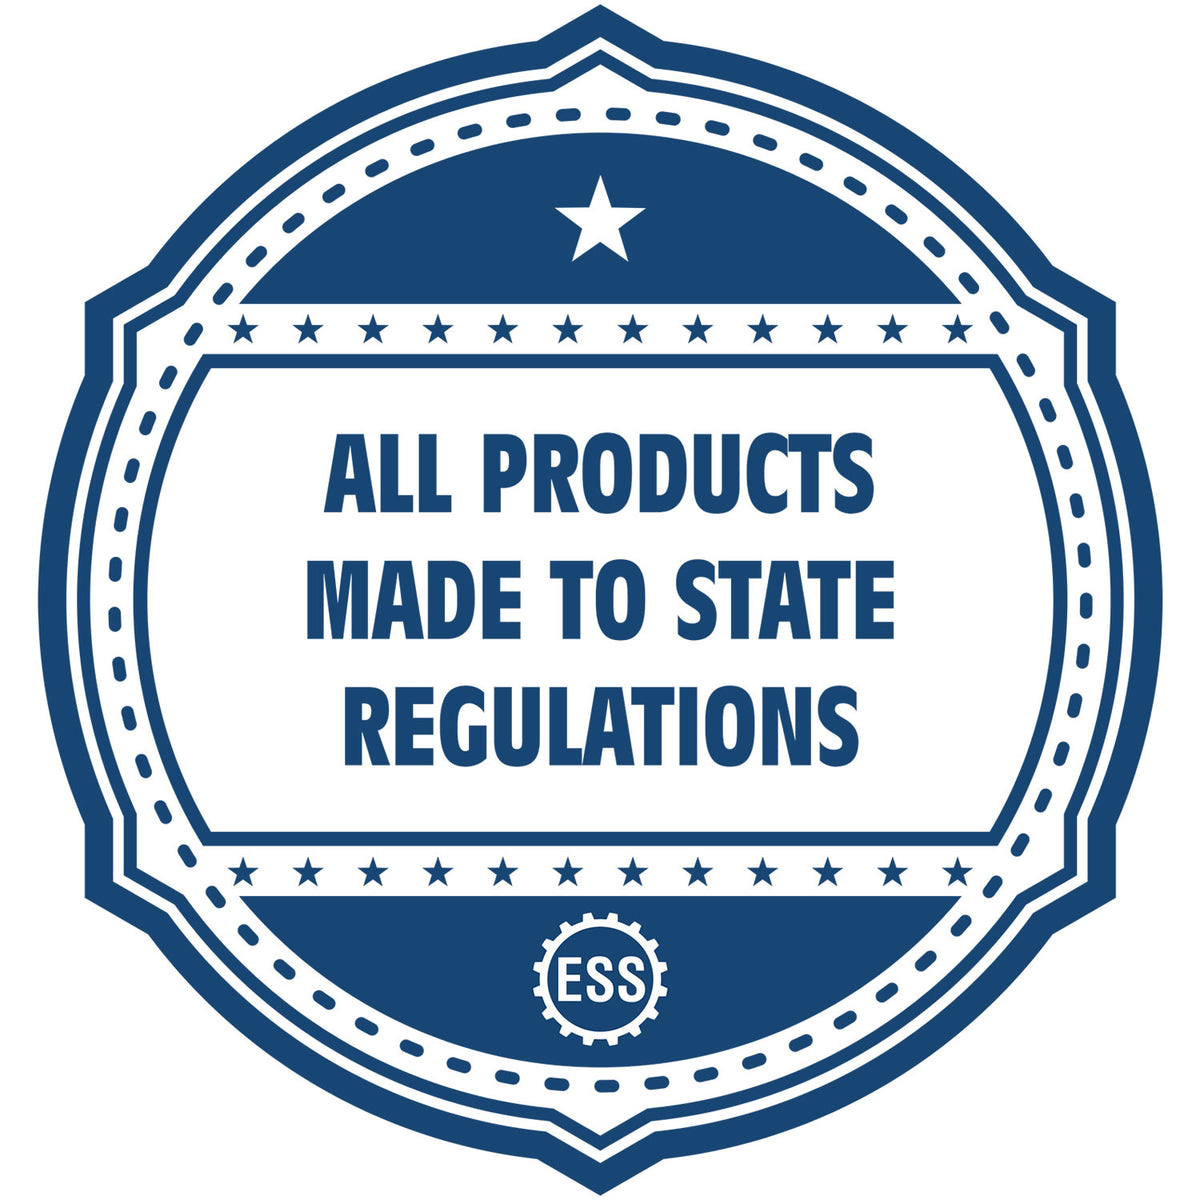 An icon or badge element for the State of Kansas Architectural Seal Embosser showing that this product is made in compliance with state regulations.